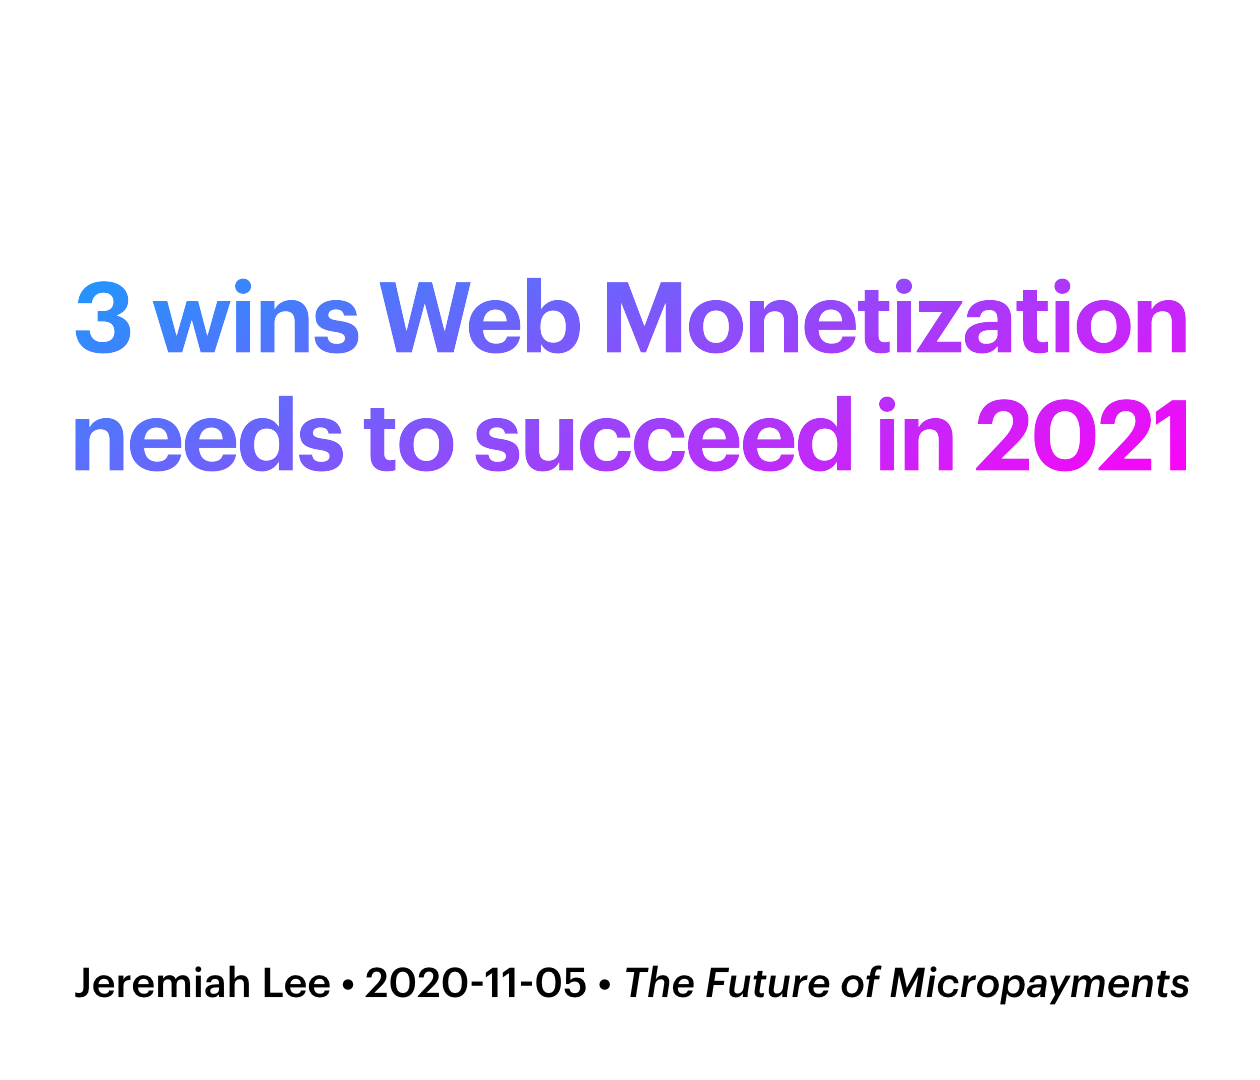 Slide. 3 things Web Monetization needs to succeed in 2021